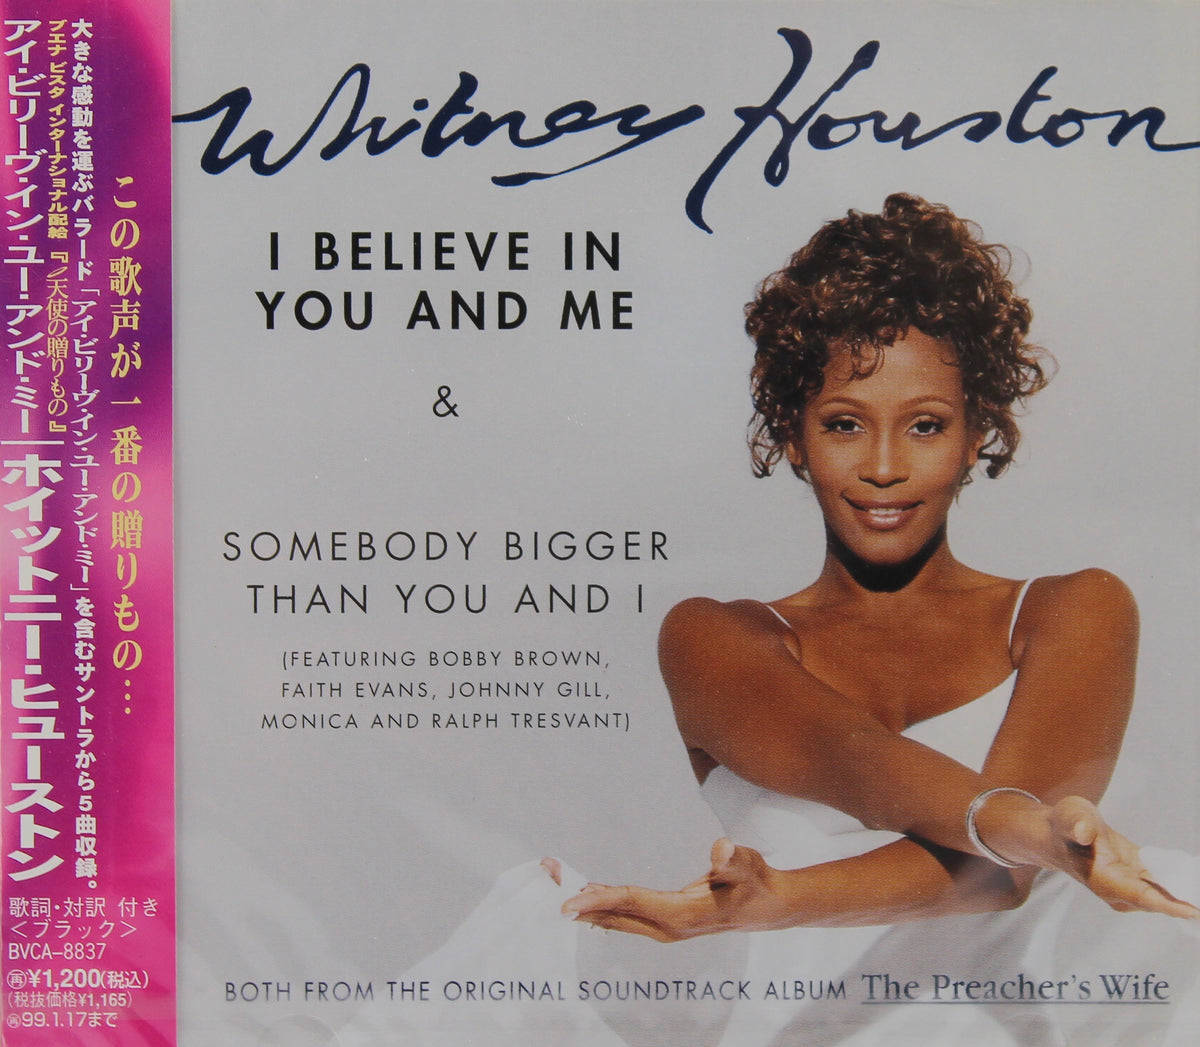 Whitney Houston ‎– I Believe In You And Me, CD Single, Japan 1997